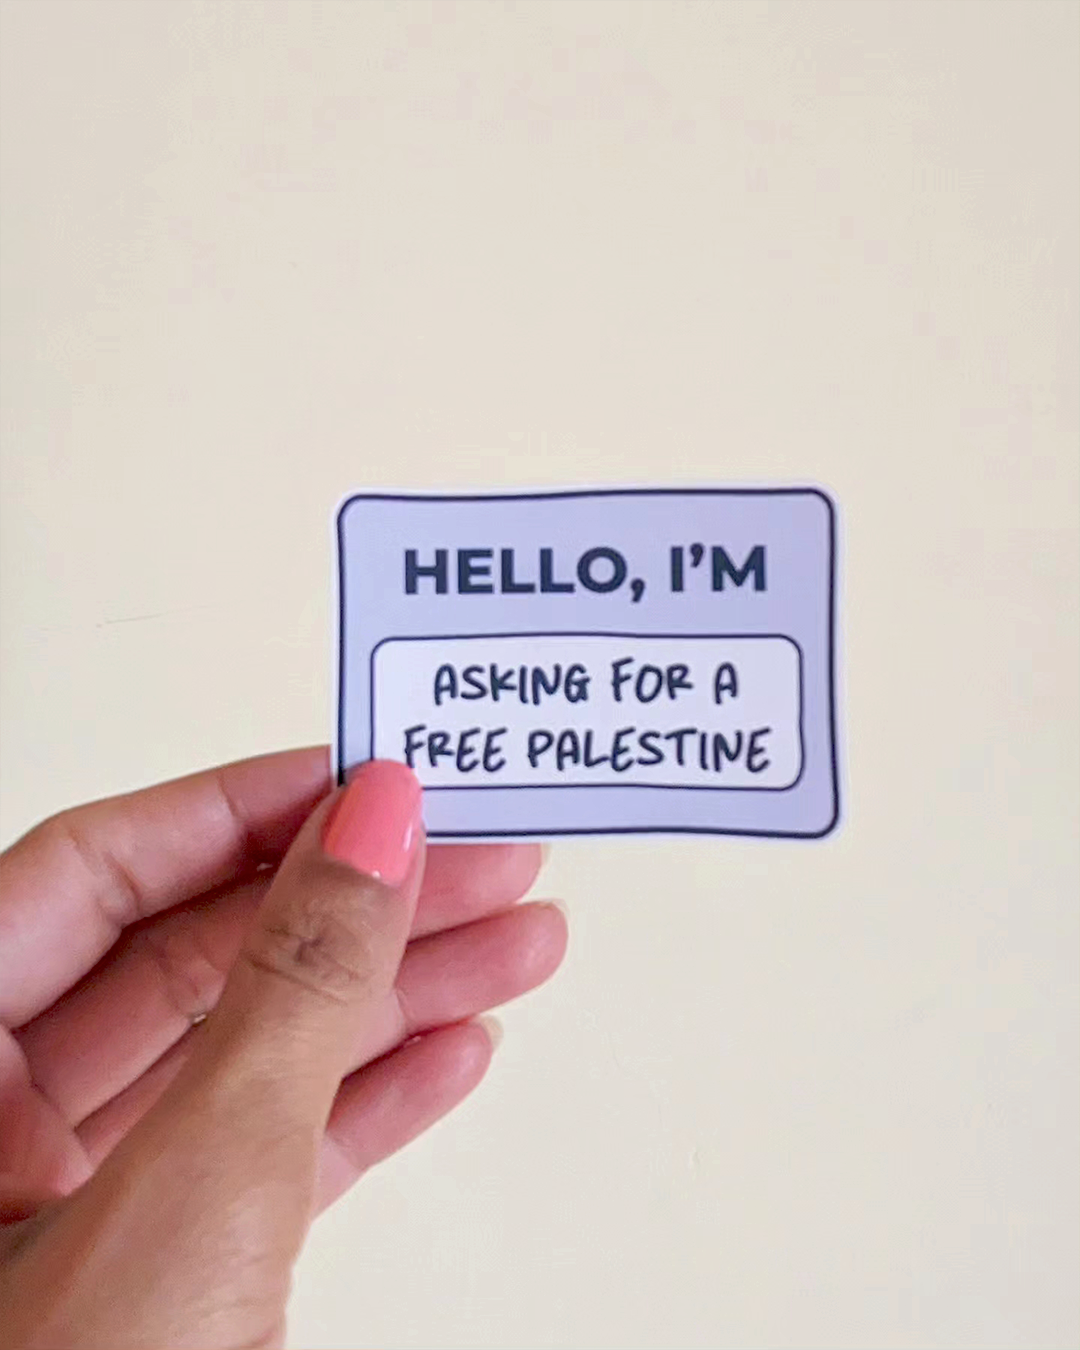 Asking for a free Palestine